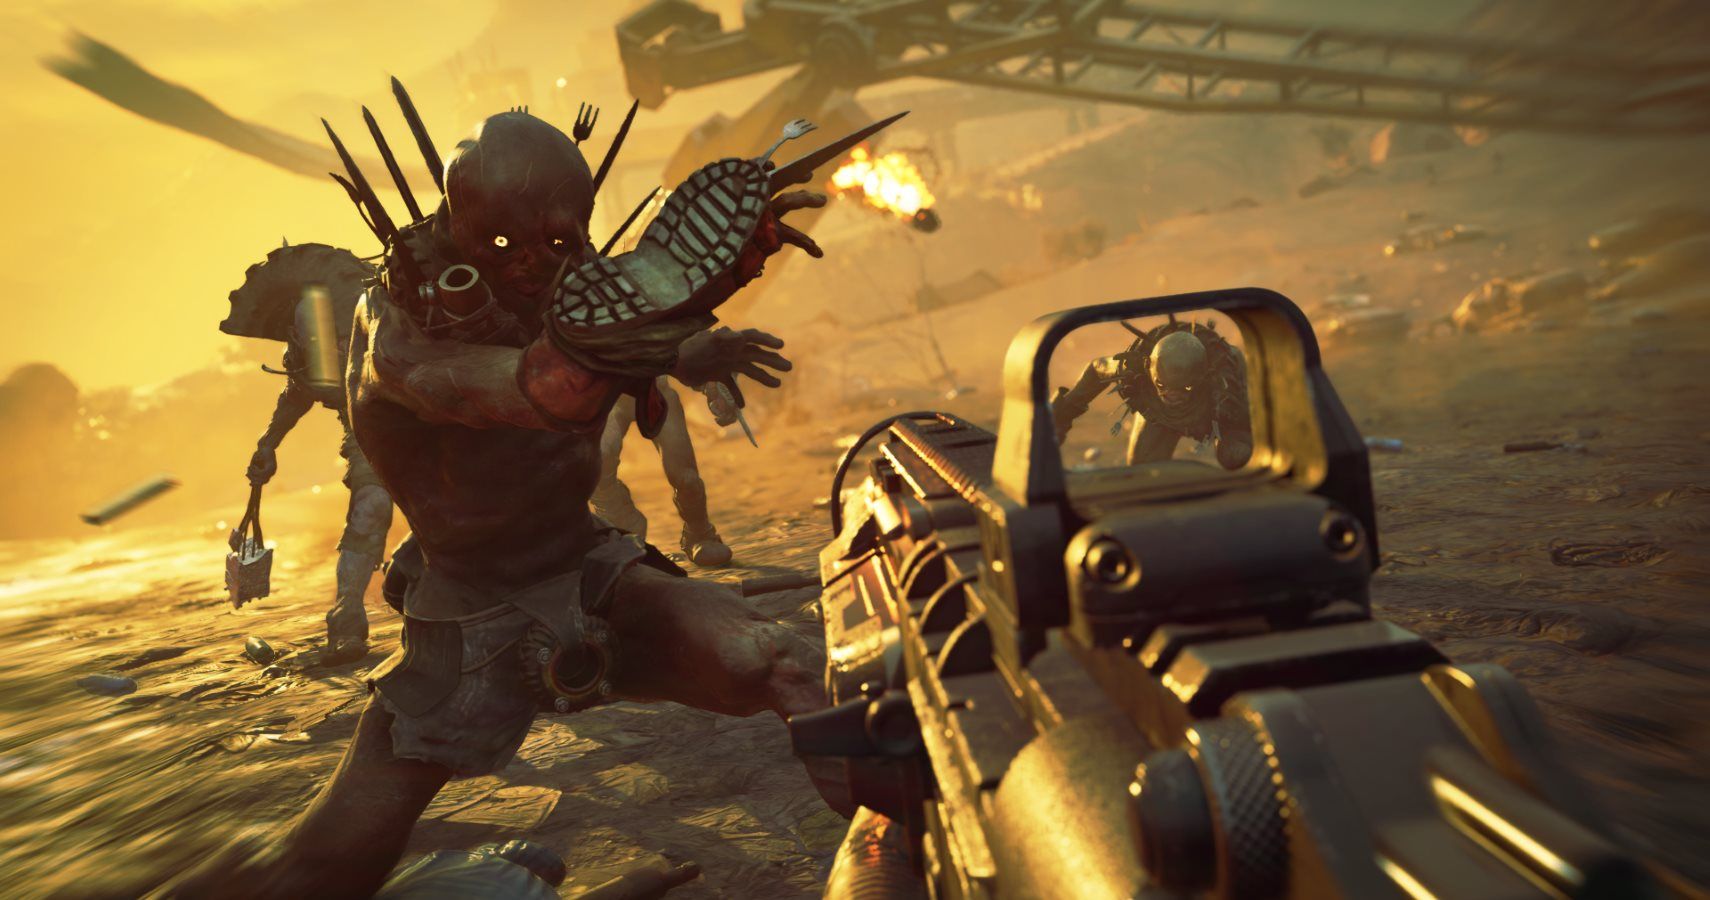 Rage 2 Developers Say It Will Not Have Loading Screens